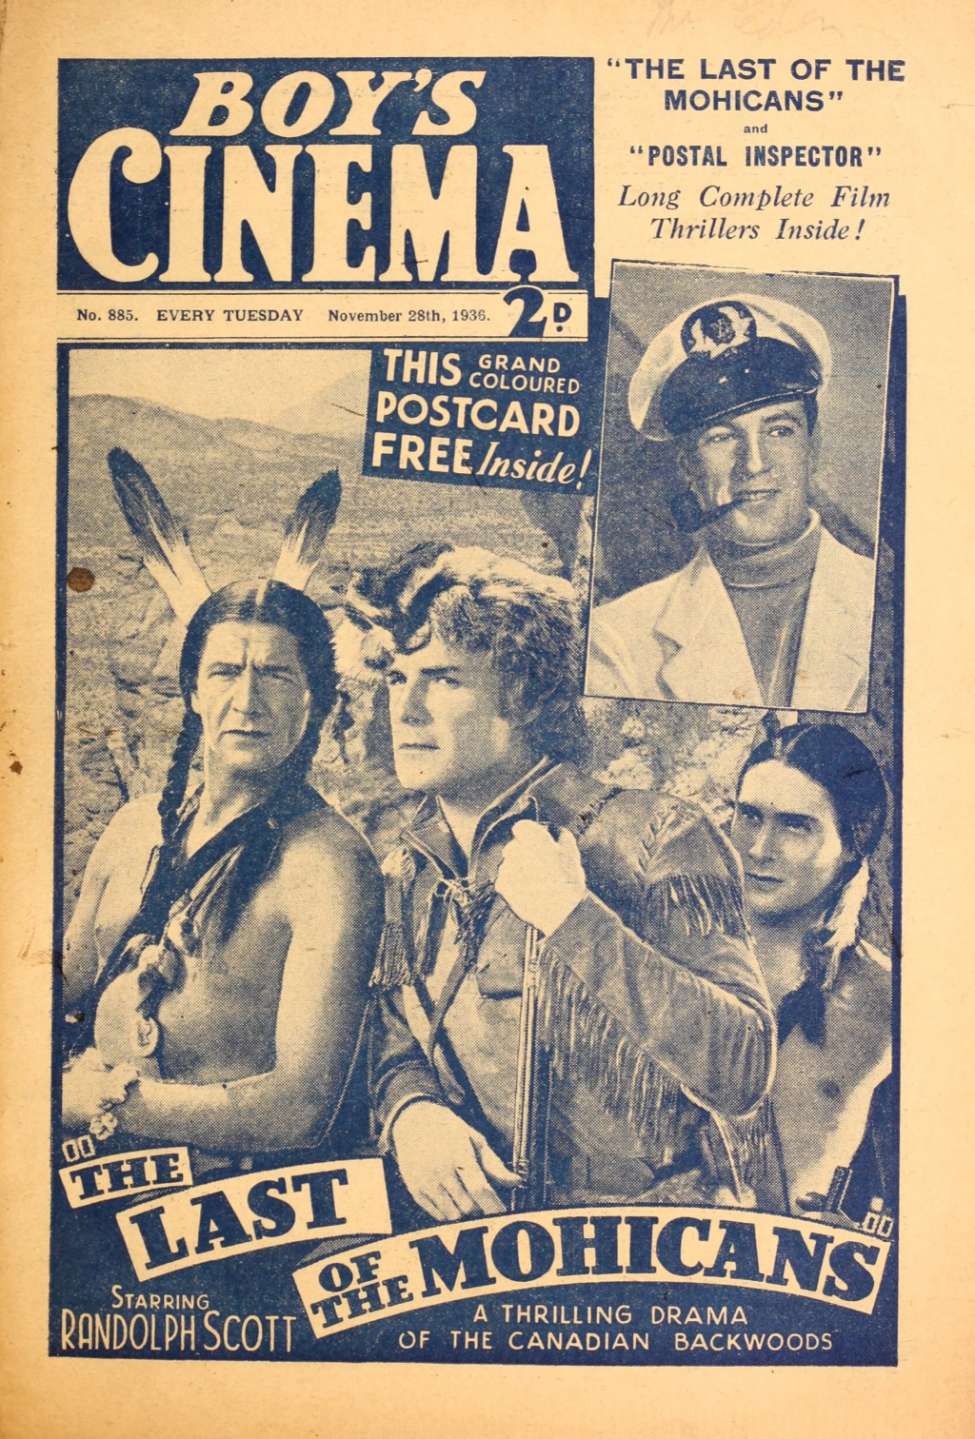 Comic Book Cover For Boy's Cinema 885 - The Last of the Mohicans - Randolph Scott